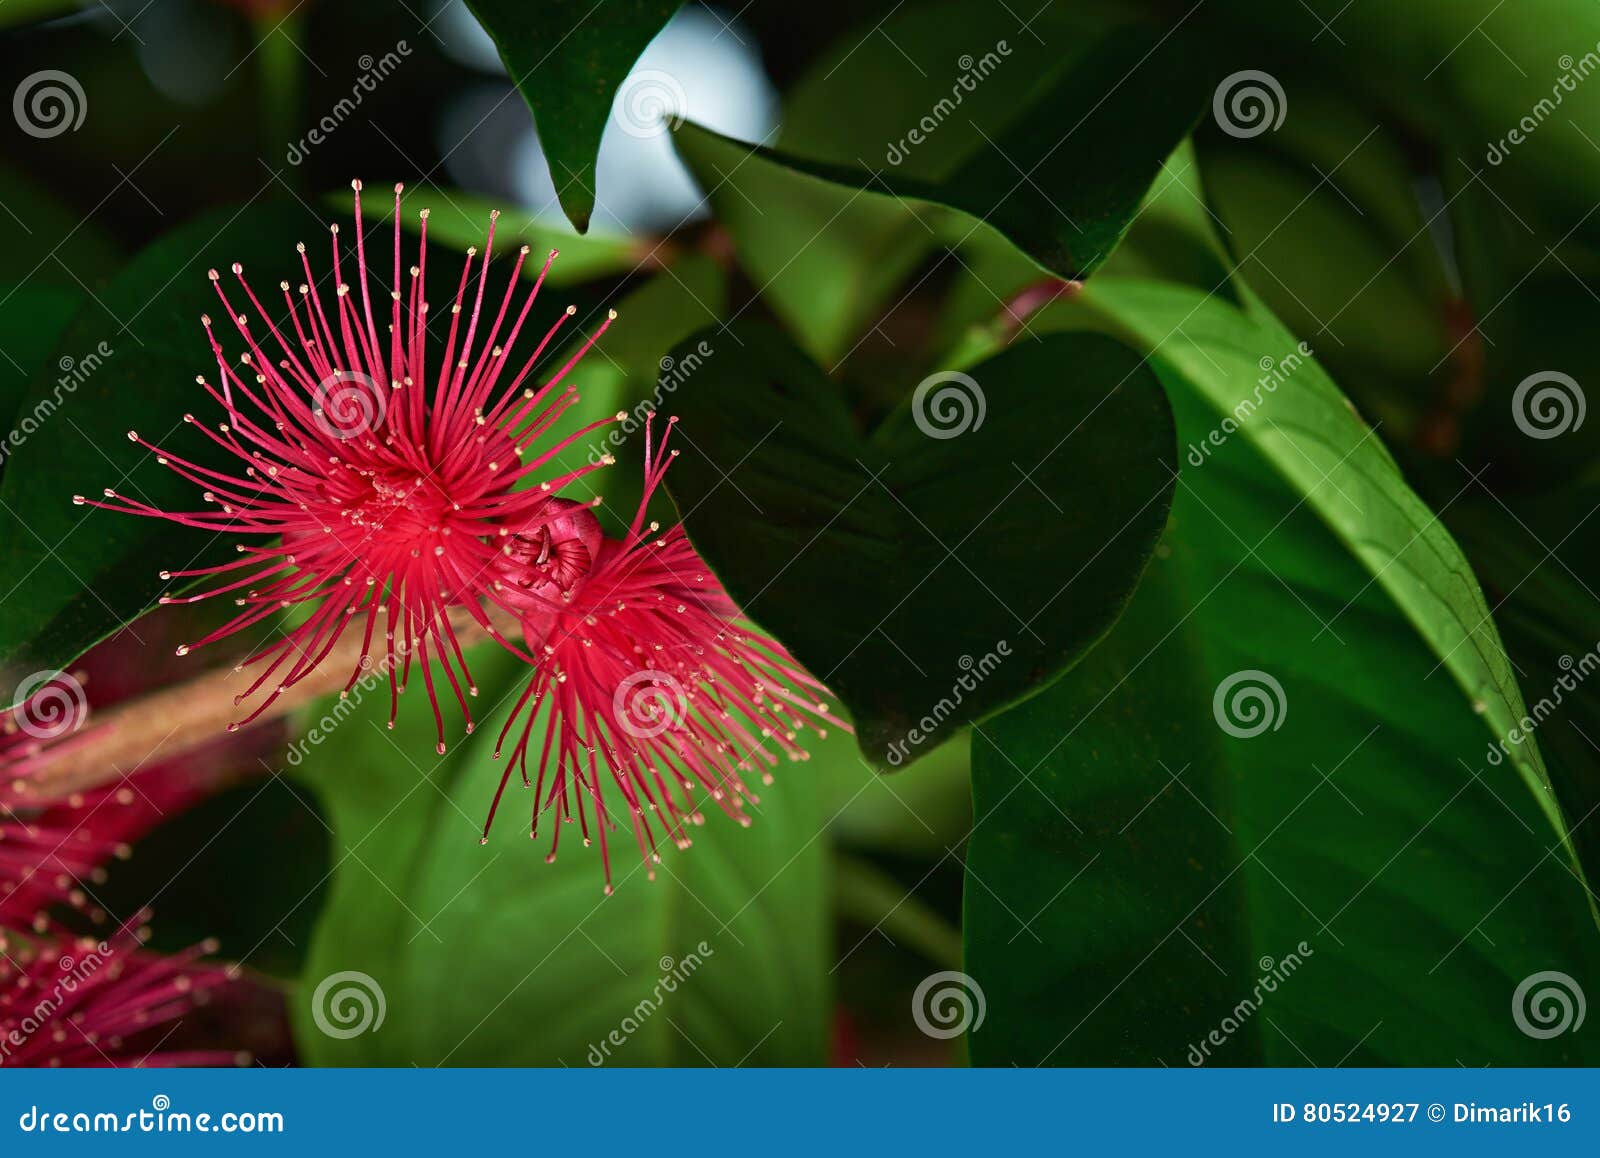 perote flower on branch